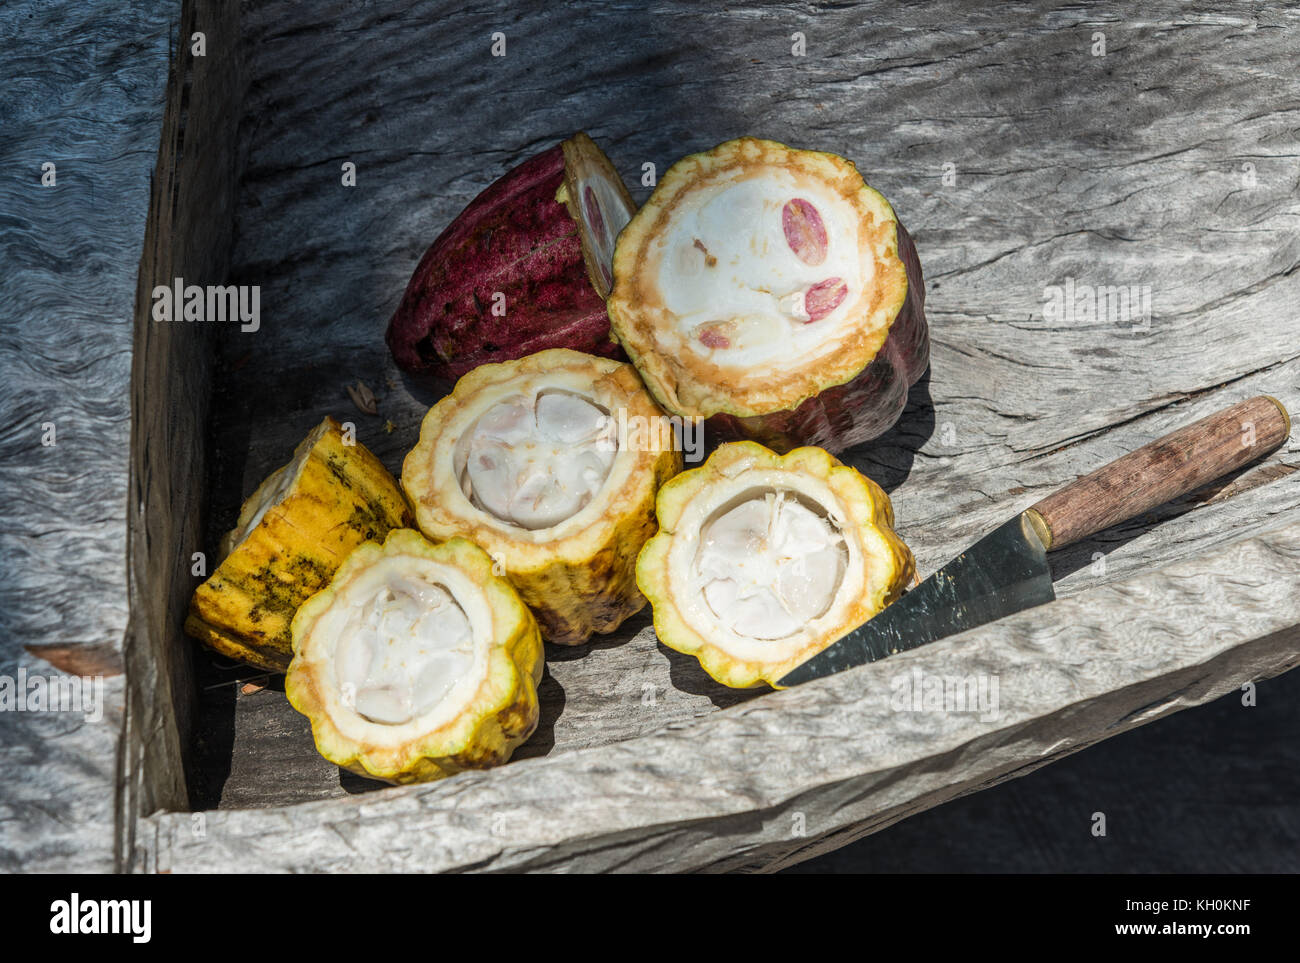 Fresh cocoa fruits cut open and served in a wooden bowl. Madagascar, Africa Stock Photo